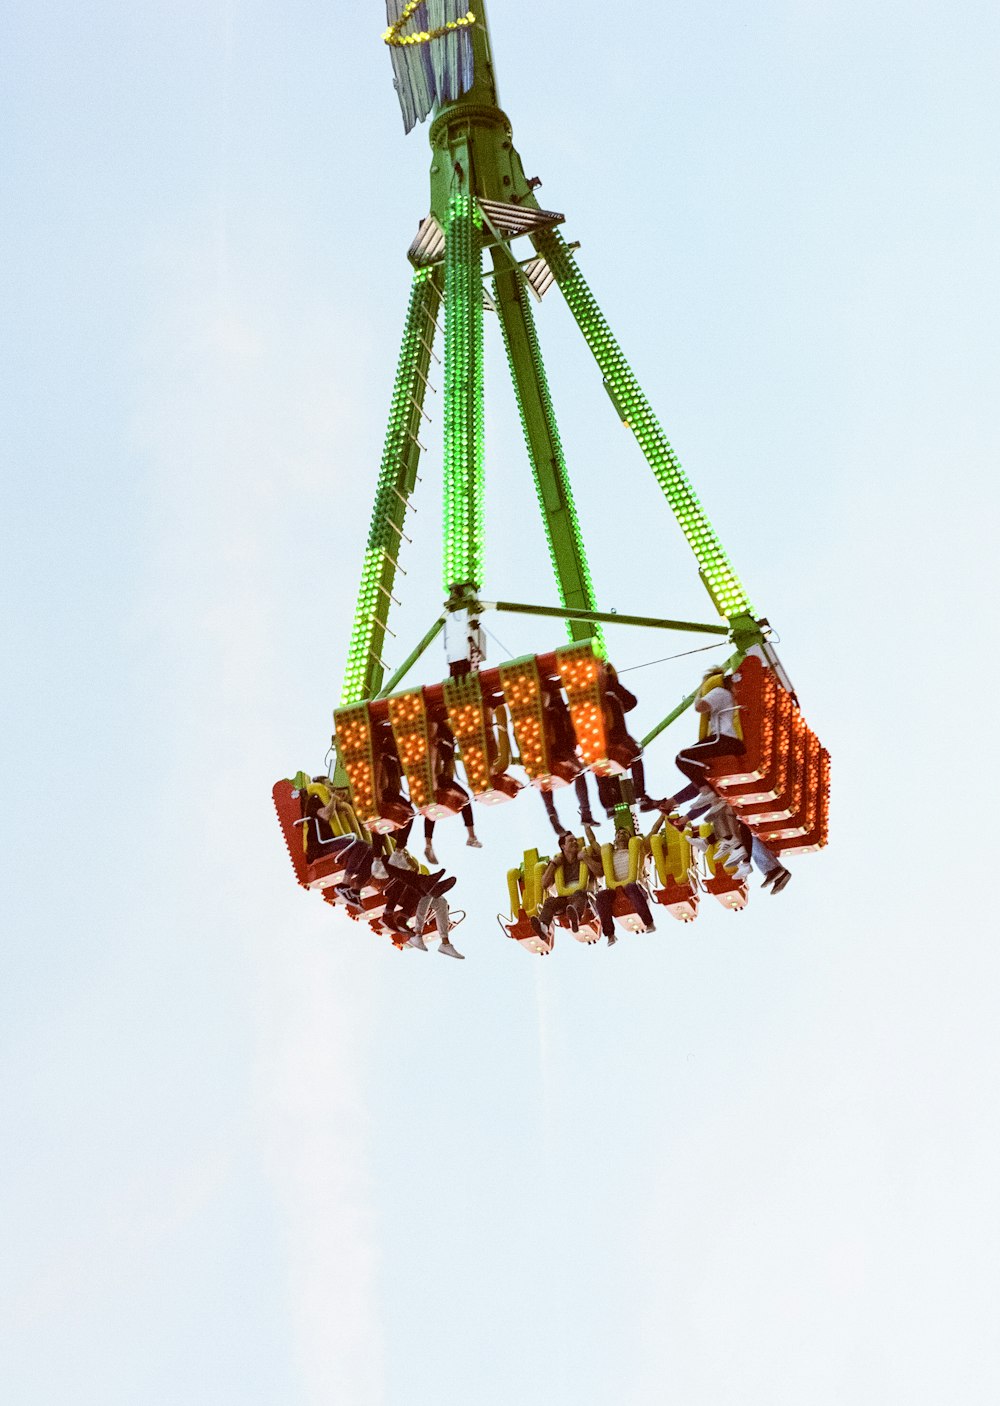 green and orange carnival ride with people